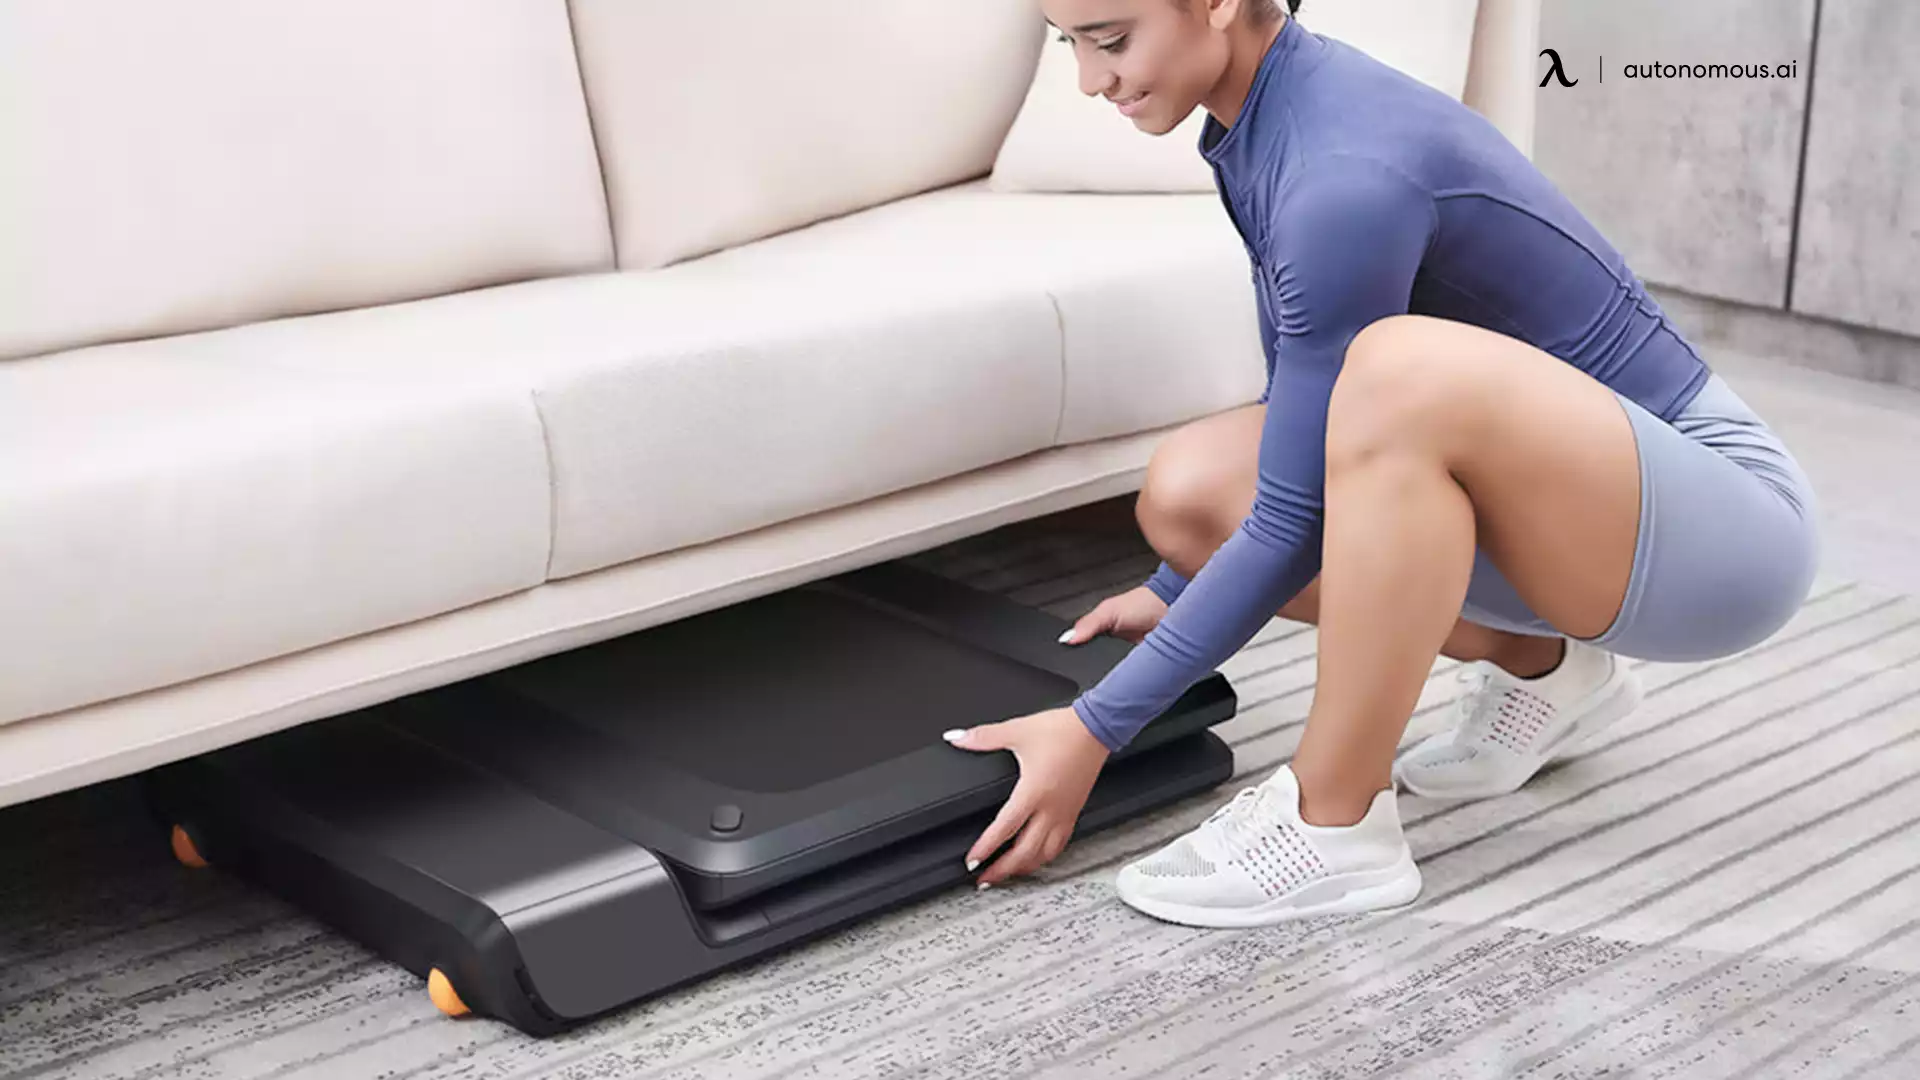 Should You Buy a Mini Folding Walking Pad for Your Office?